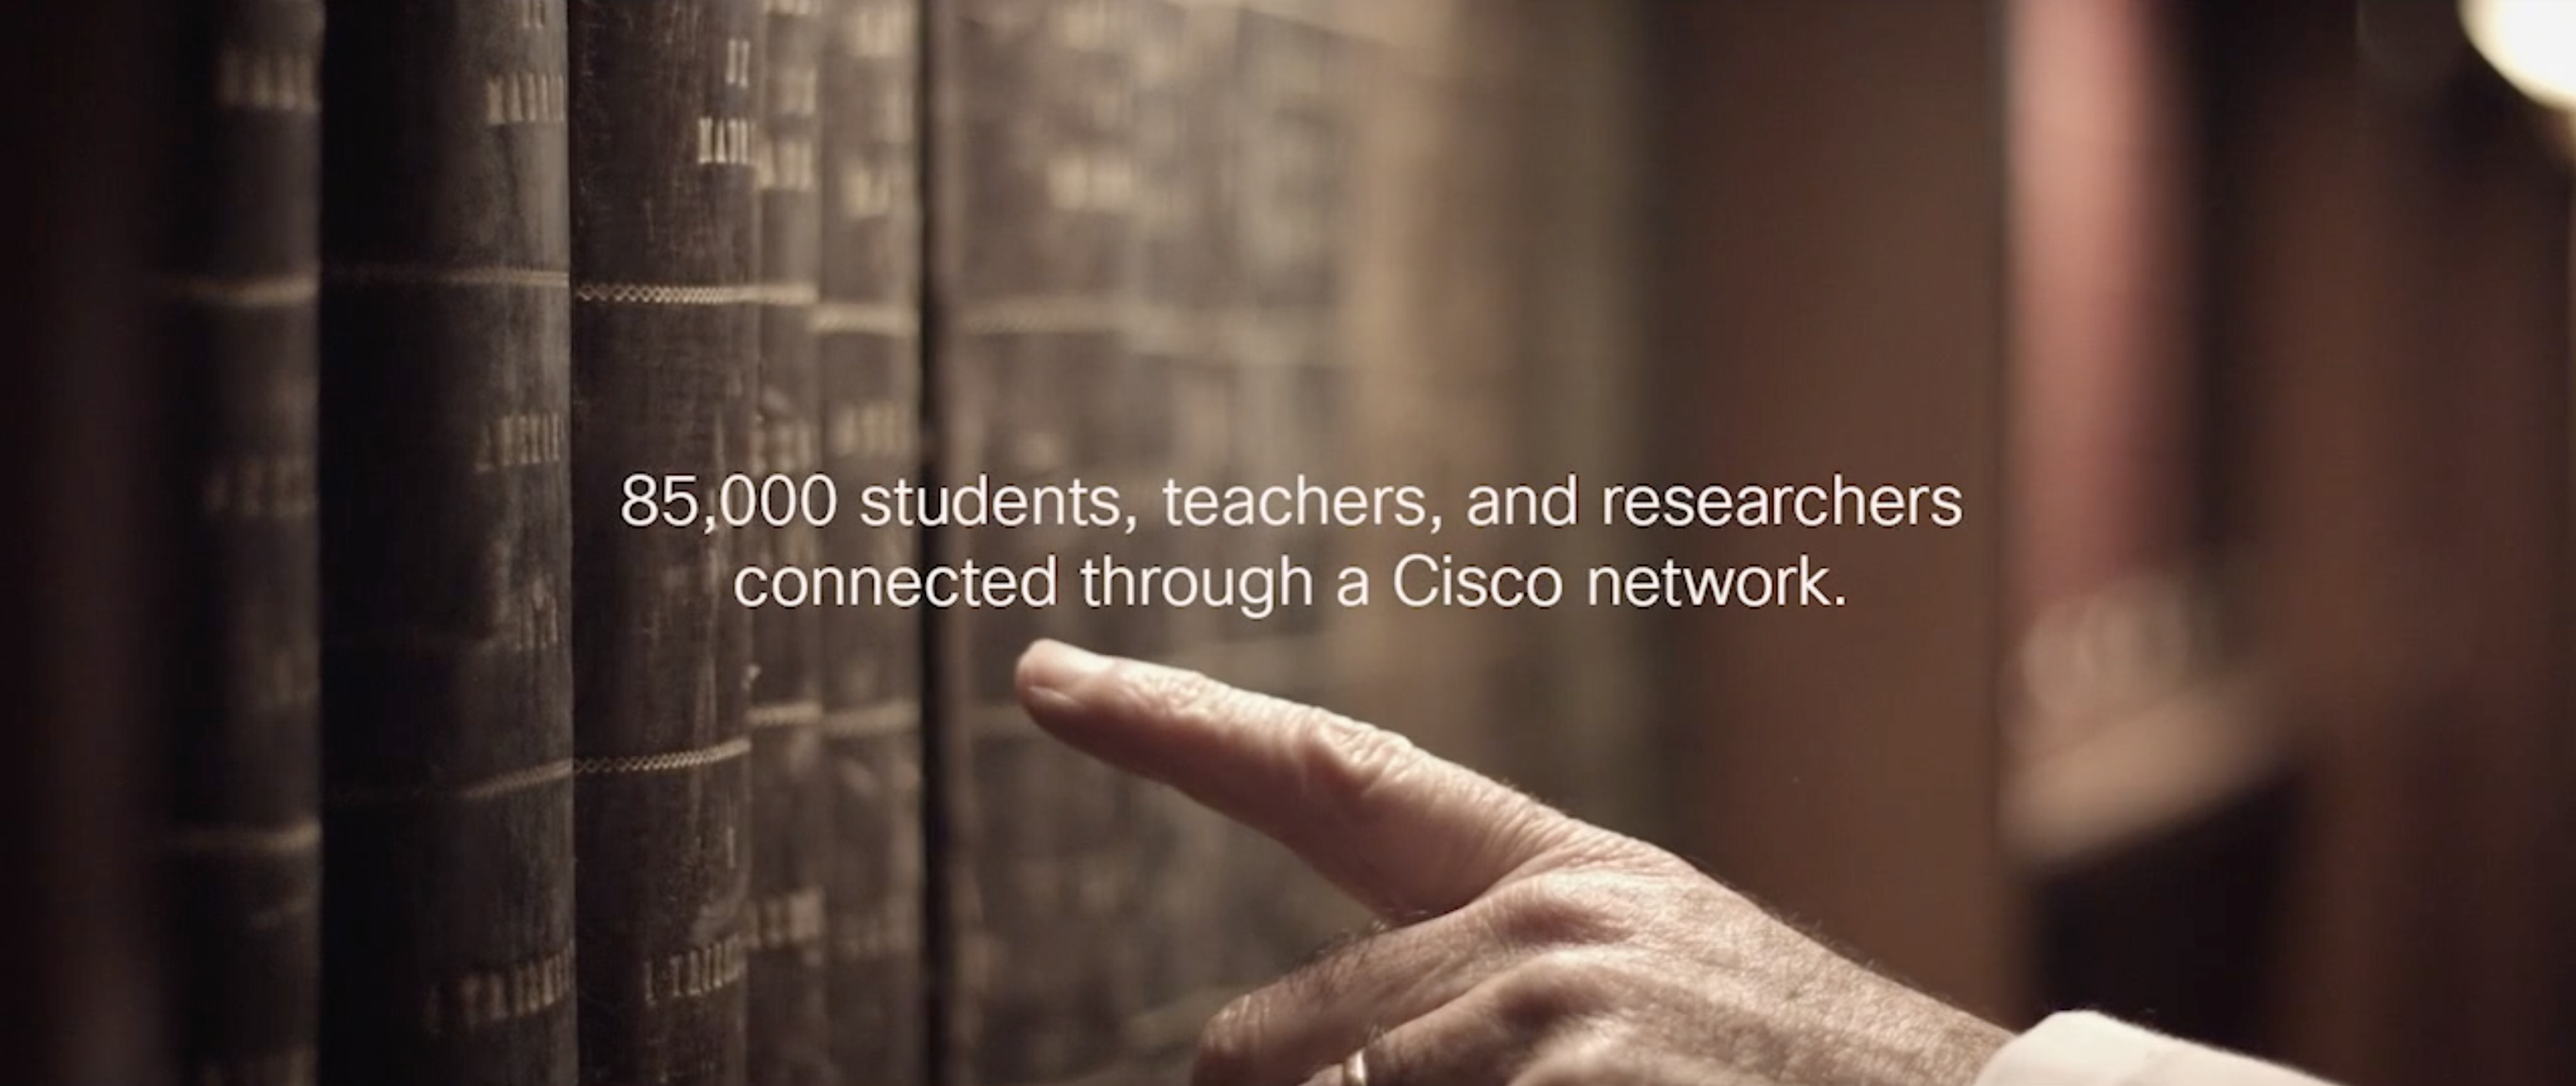 85,000 students, teachers and researchers connected through a Cisco network